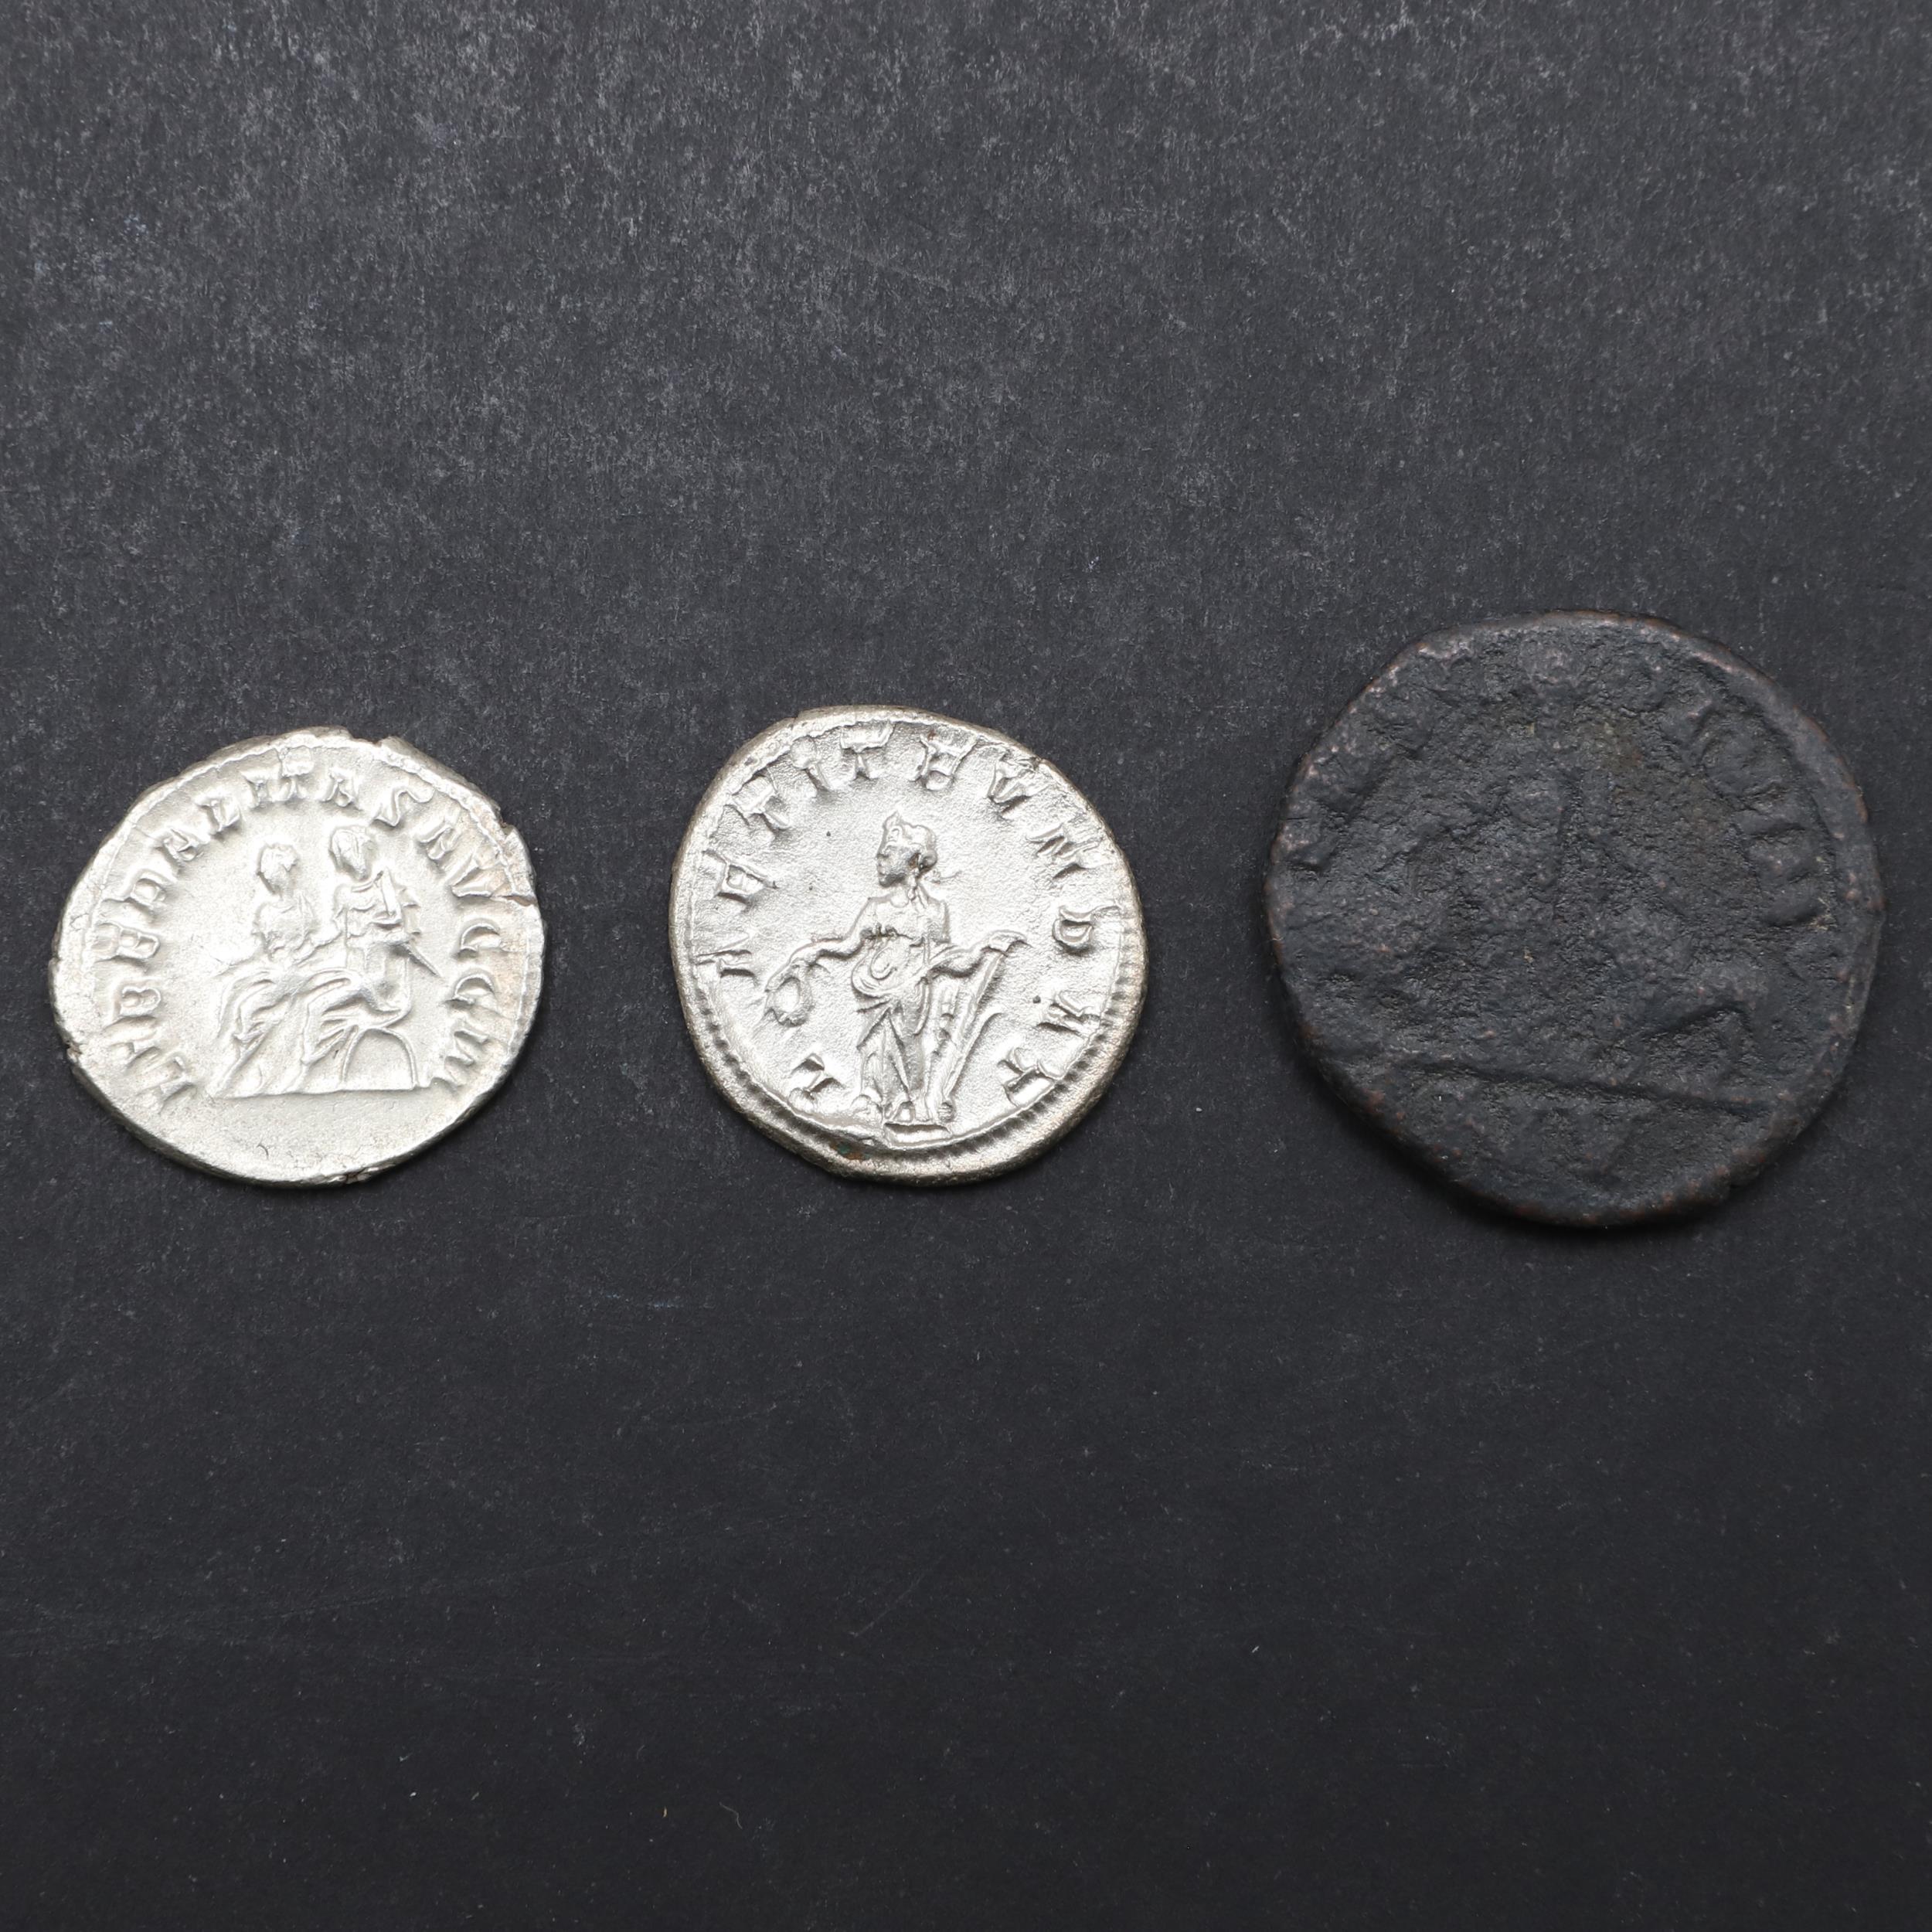 ROMAN IMPERIAL COINAGE: PHILIP I 244-249 AND PHILIP II 247 - 249 A.D. - Image 2 of 4